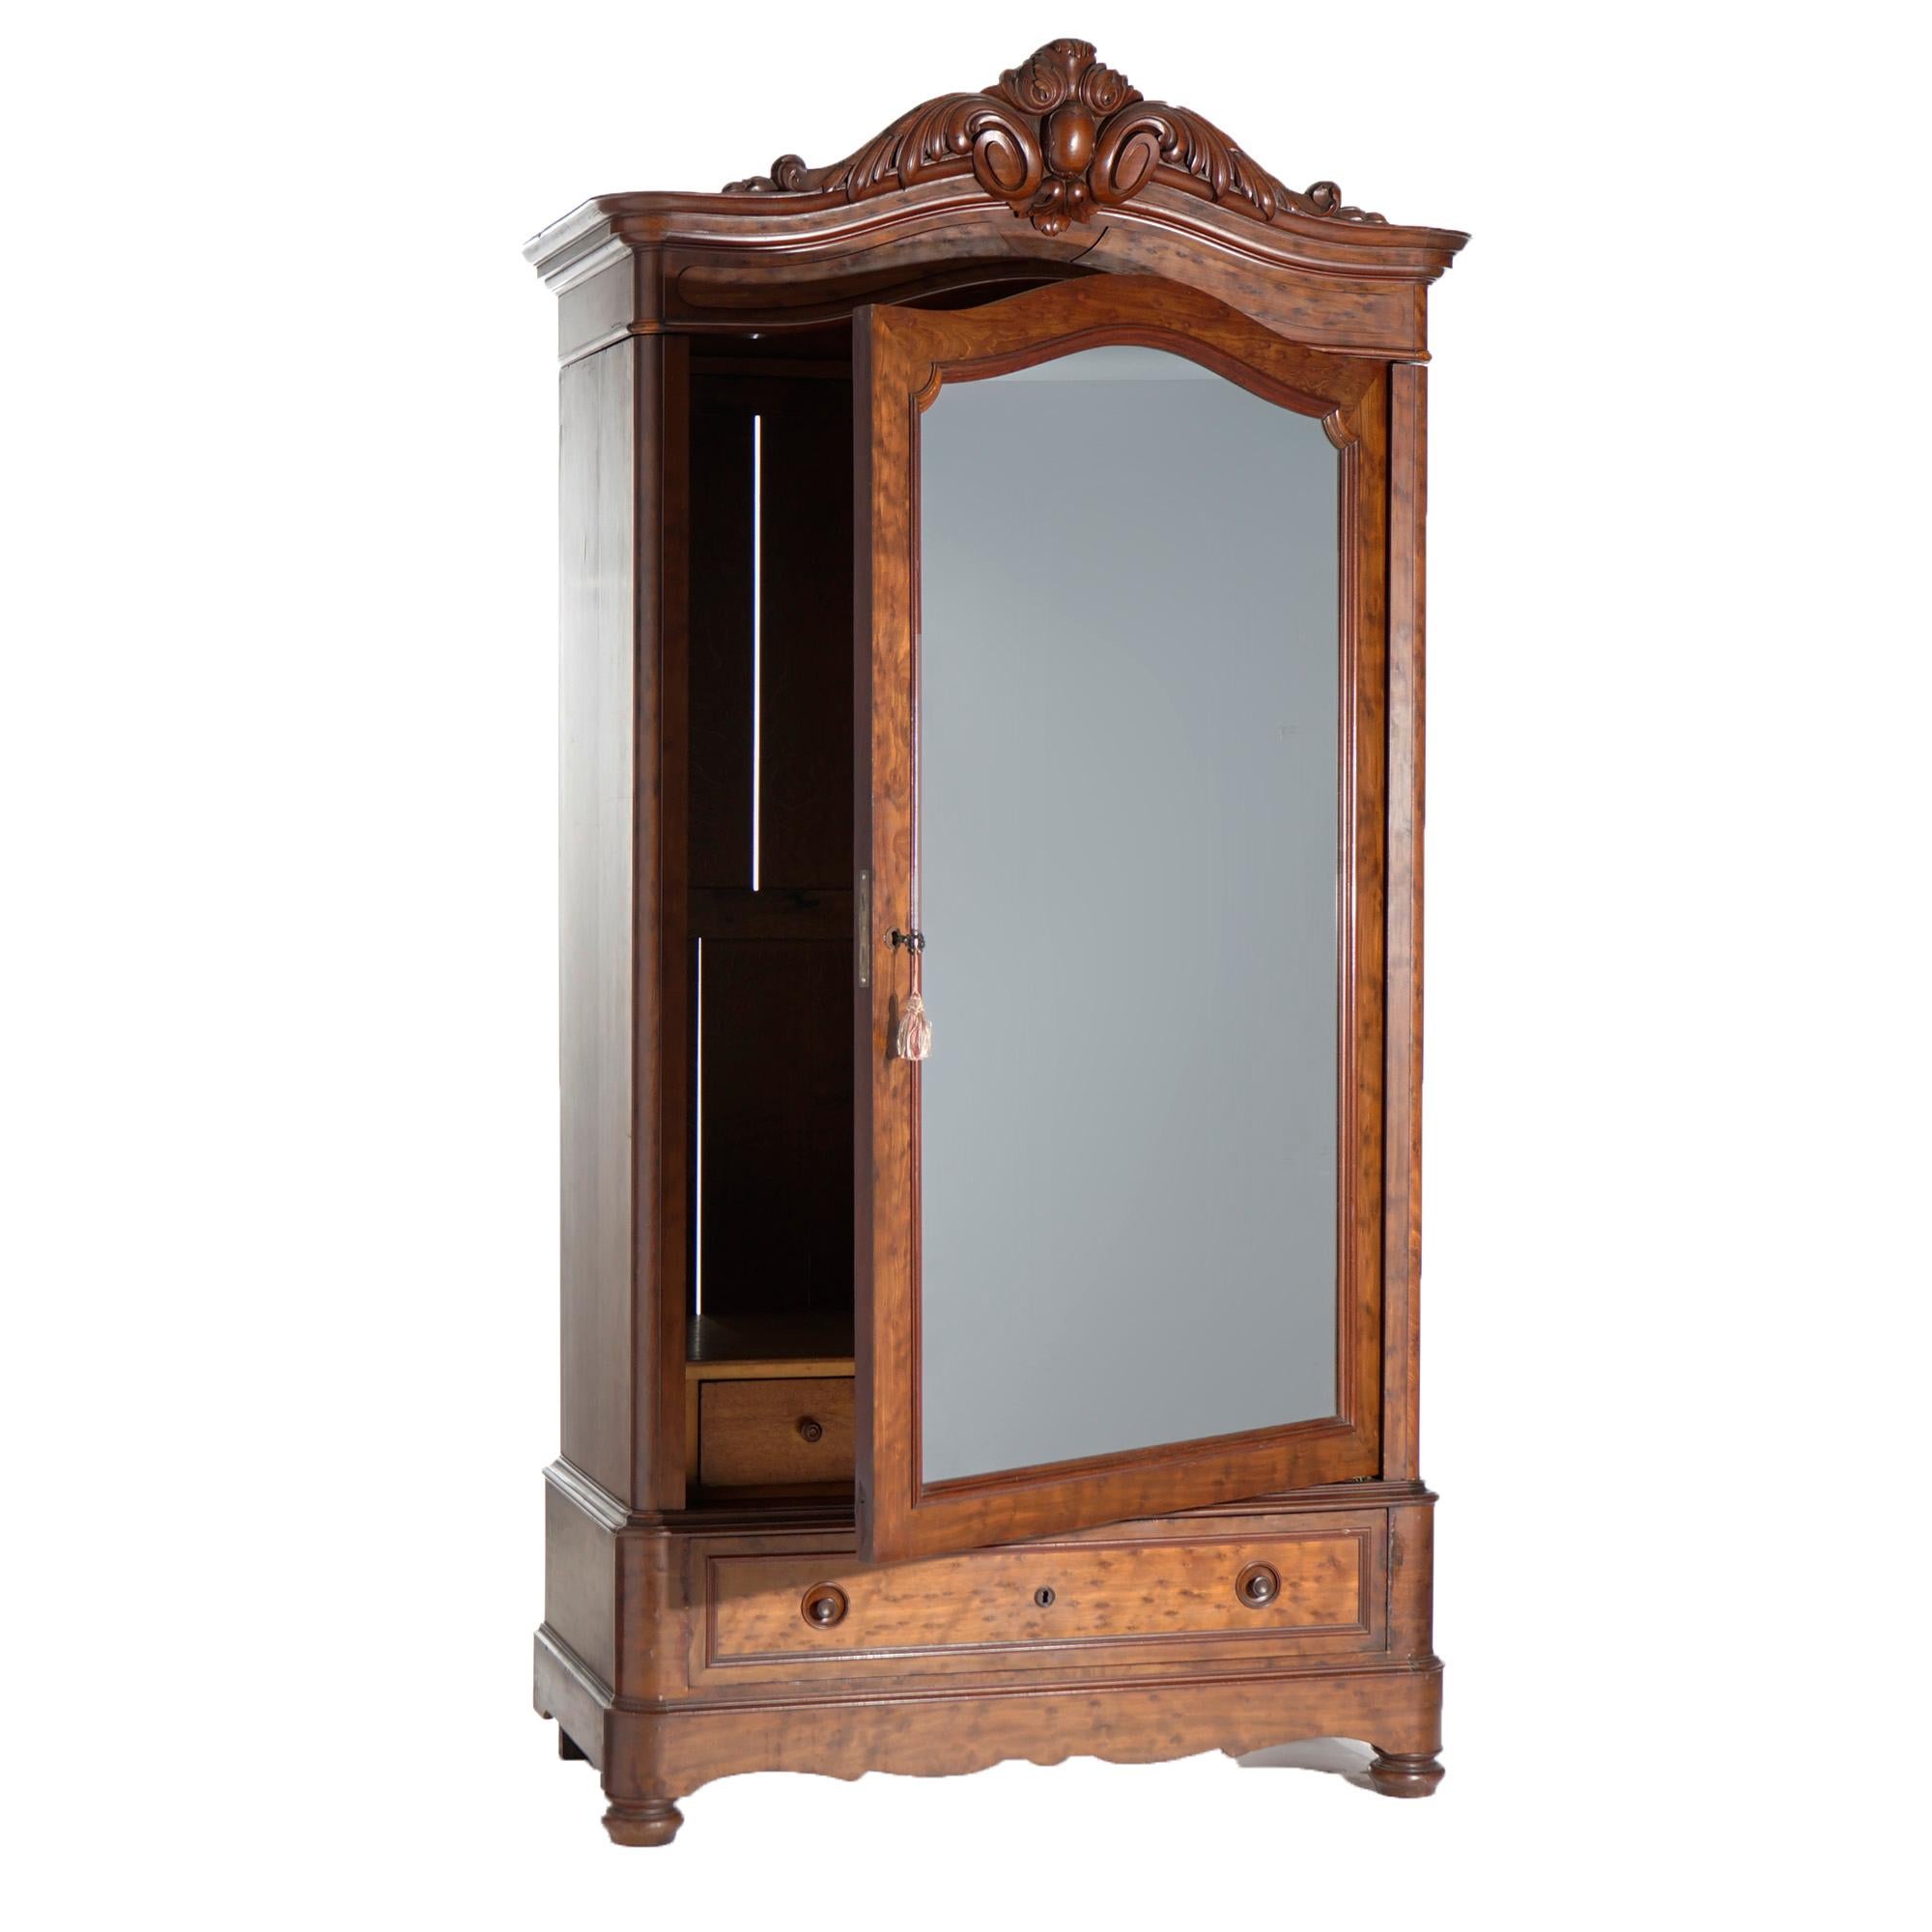 An antique Continental armoire offers flame mahogany construction with arched top having carved foliate and shield crest over case having single mirrored door and lower long drawer, raised on bun feet, c1880

Measures- 92''H x 46.25''W x